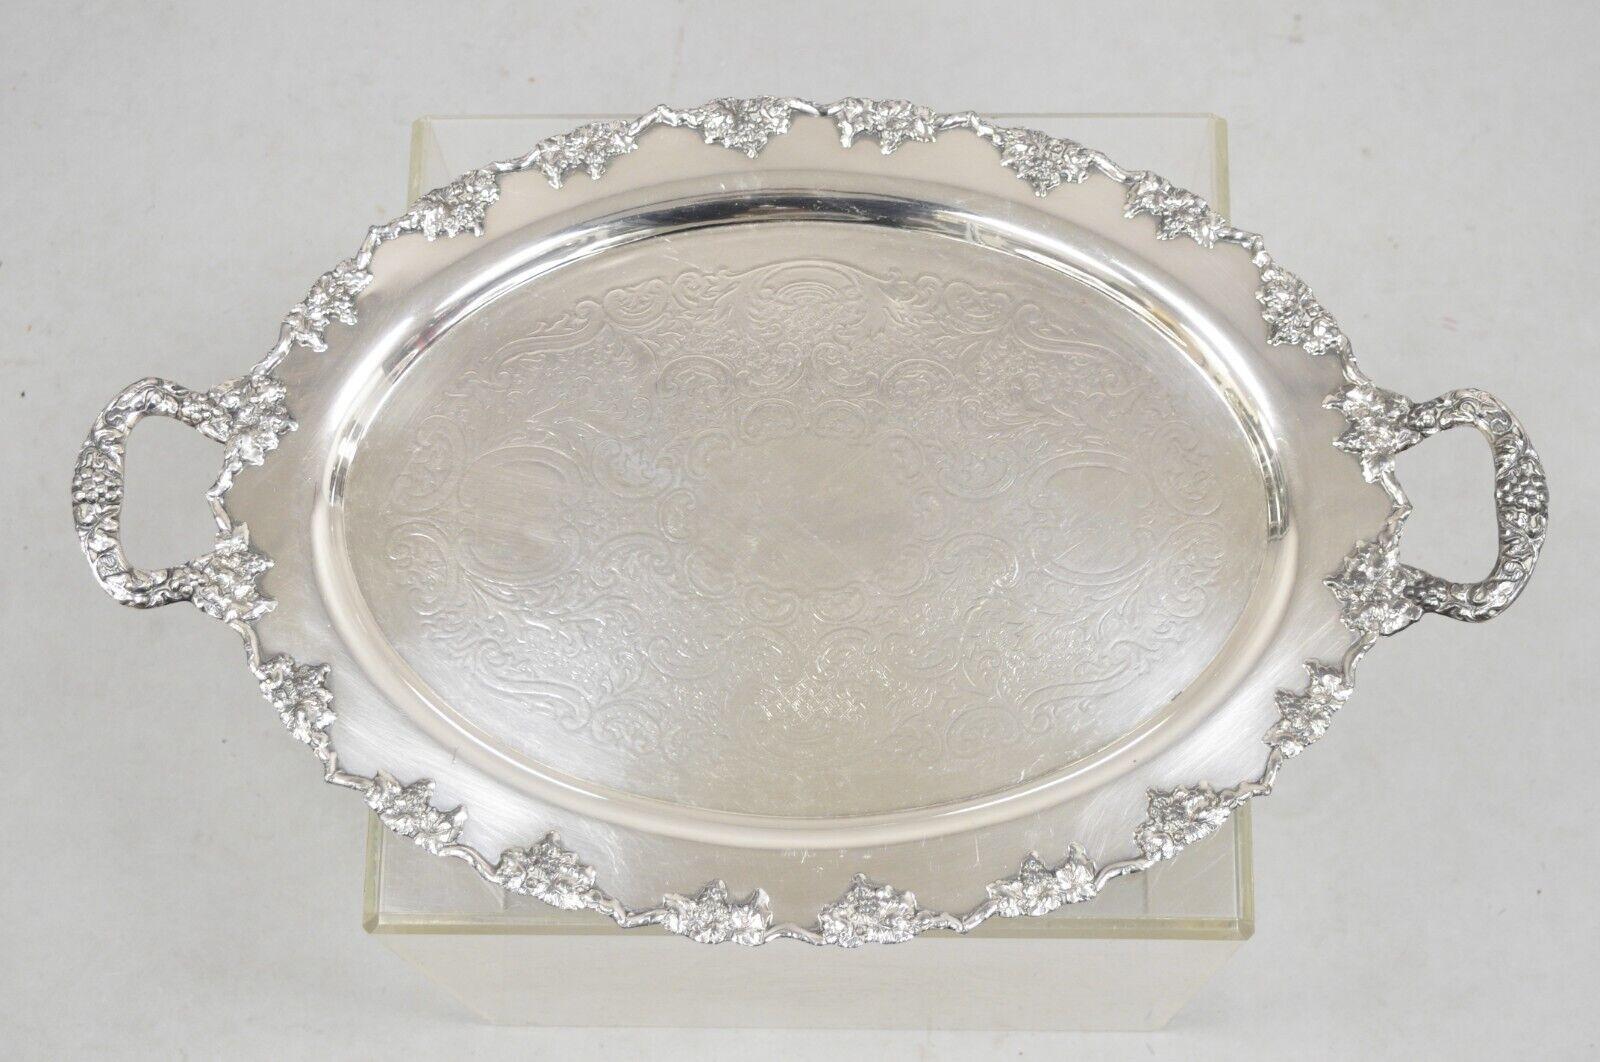 Vintage Crescent 1082 Victorian Style Silver Plated Oval Serving Platter Tray. Circa Mid 20th Century. Measurements: 1.5 